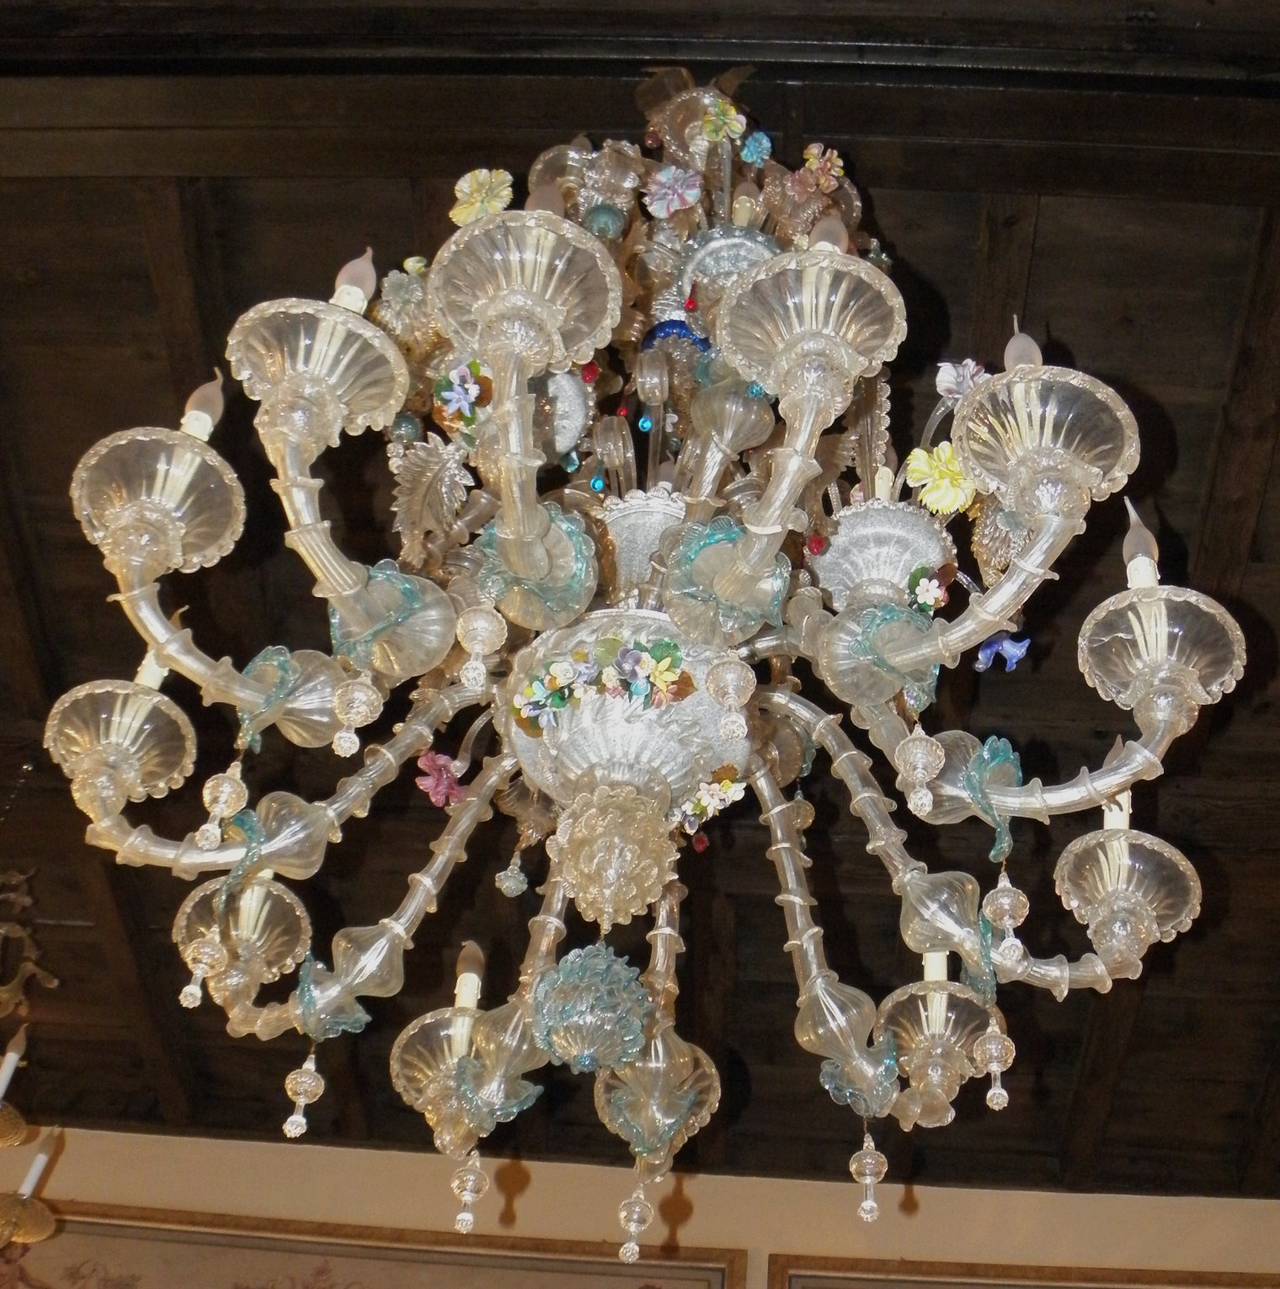 Important Murano glass second half of 19th century chandelier, 25 lights on four level, the lower level is 12 lights, it have all the pieces with nothing missing or broken, a unique work from master Italian craftsmen impossible to have nowadays, it